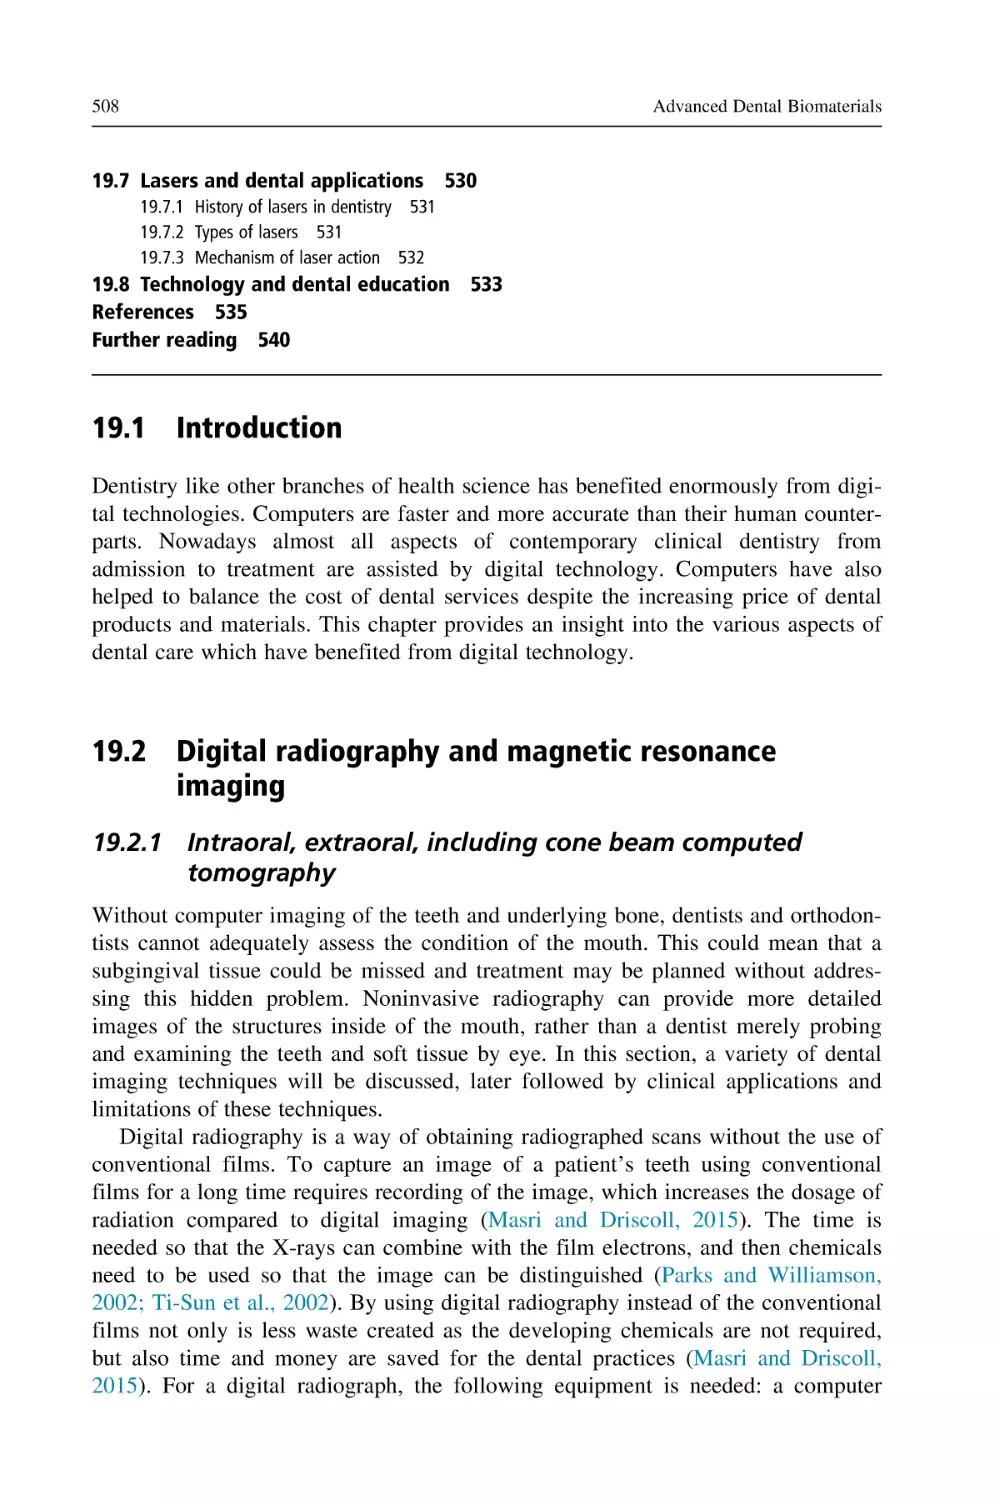 19.1 Introduction
19.2 Digital radiography and magnetic resonance imaging
19.2.1 Intraoral, extraoral, including cone beam computed tomography